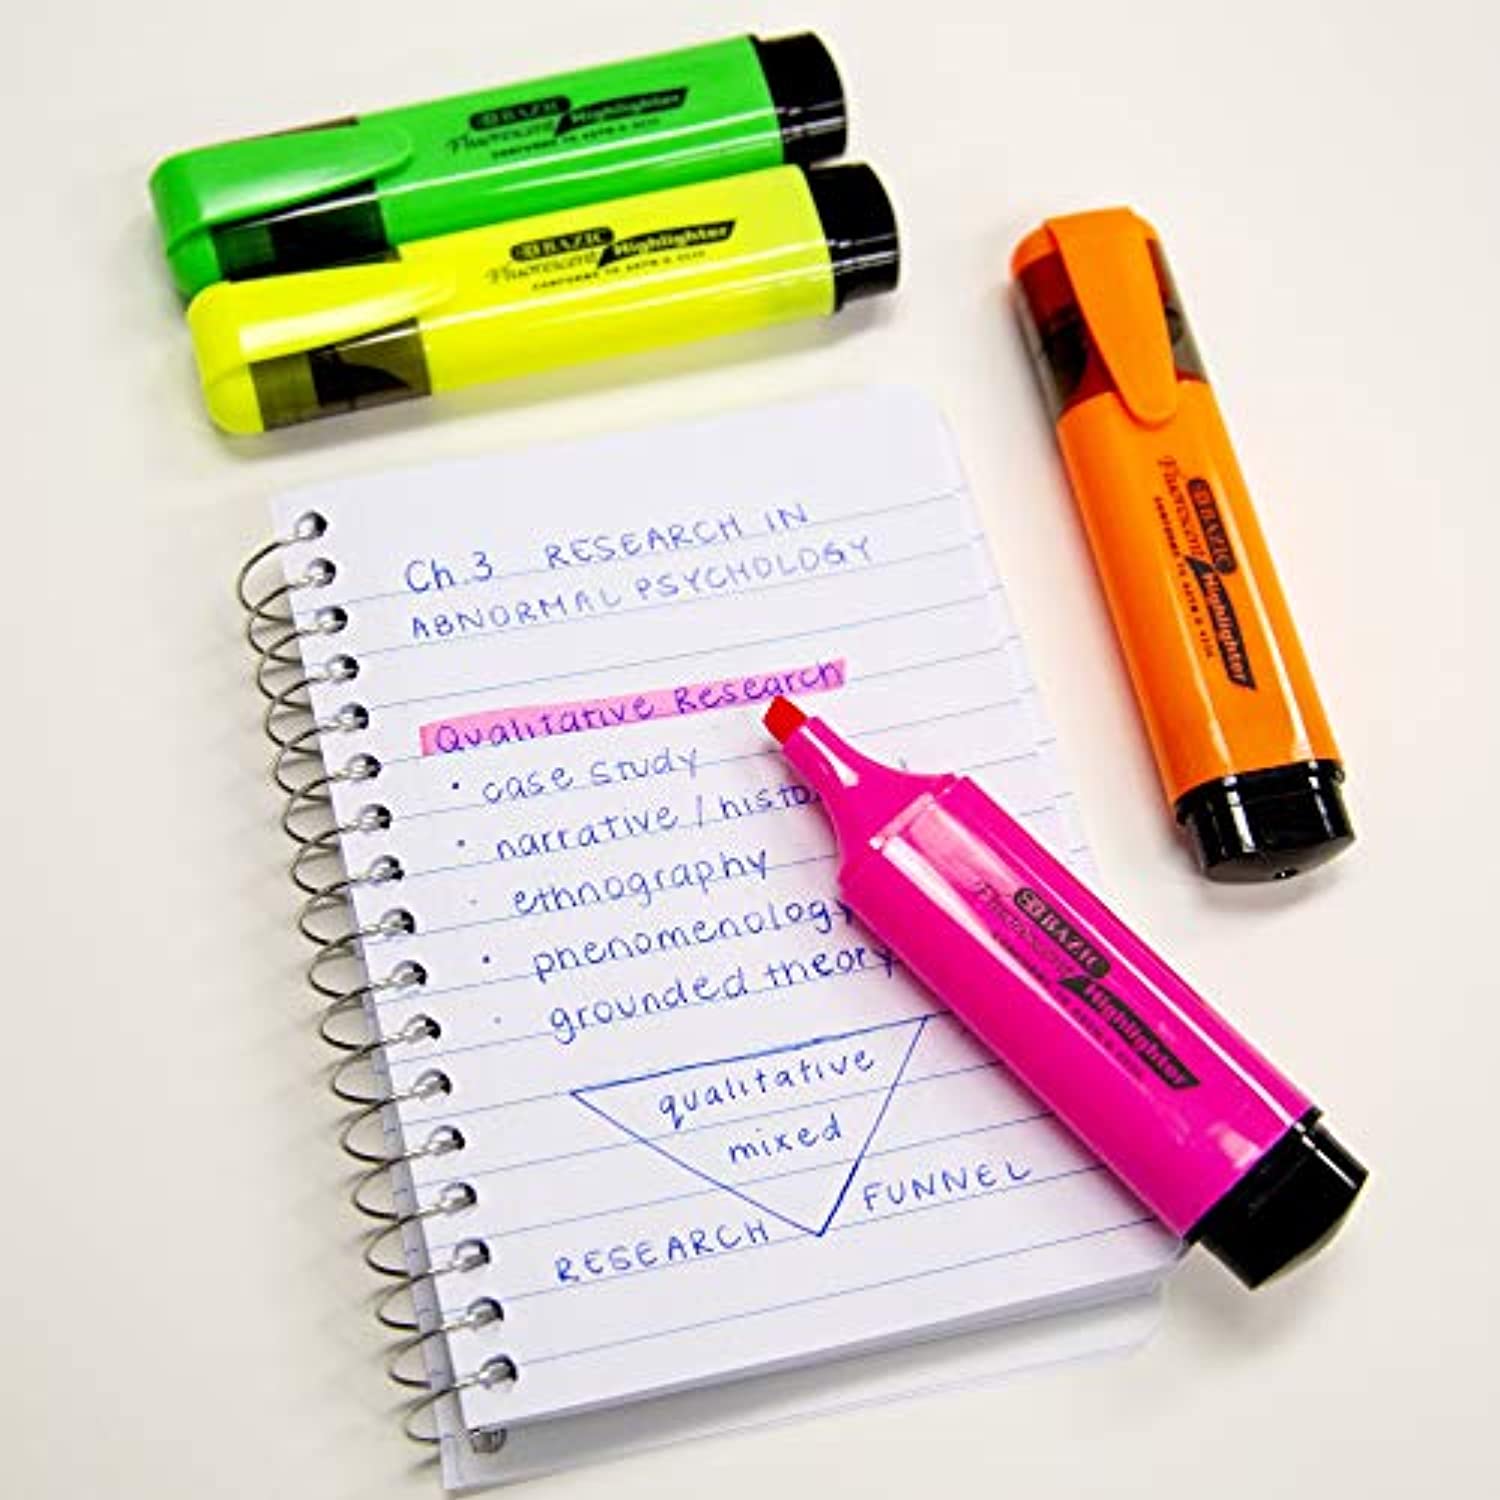 Neon Highlighters w/Pocket Clip, Chisel Tip Broad Fine Line, Unscented Quick Dry (4/Pack)